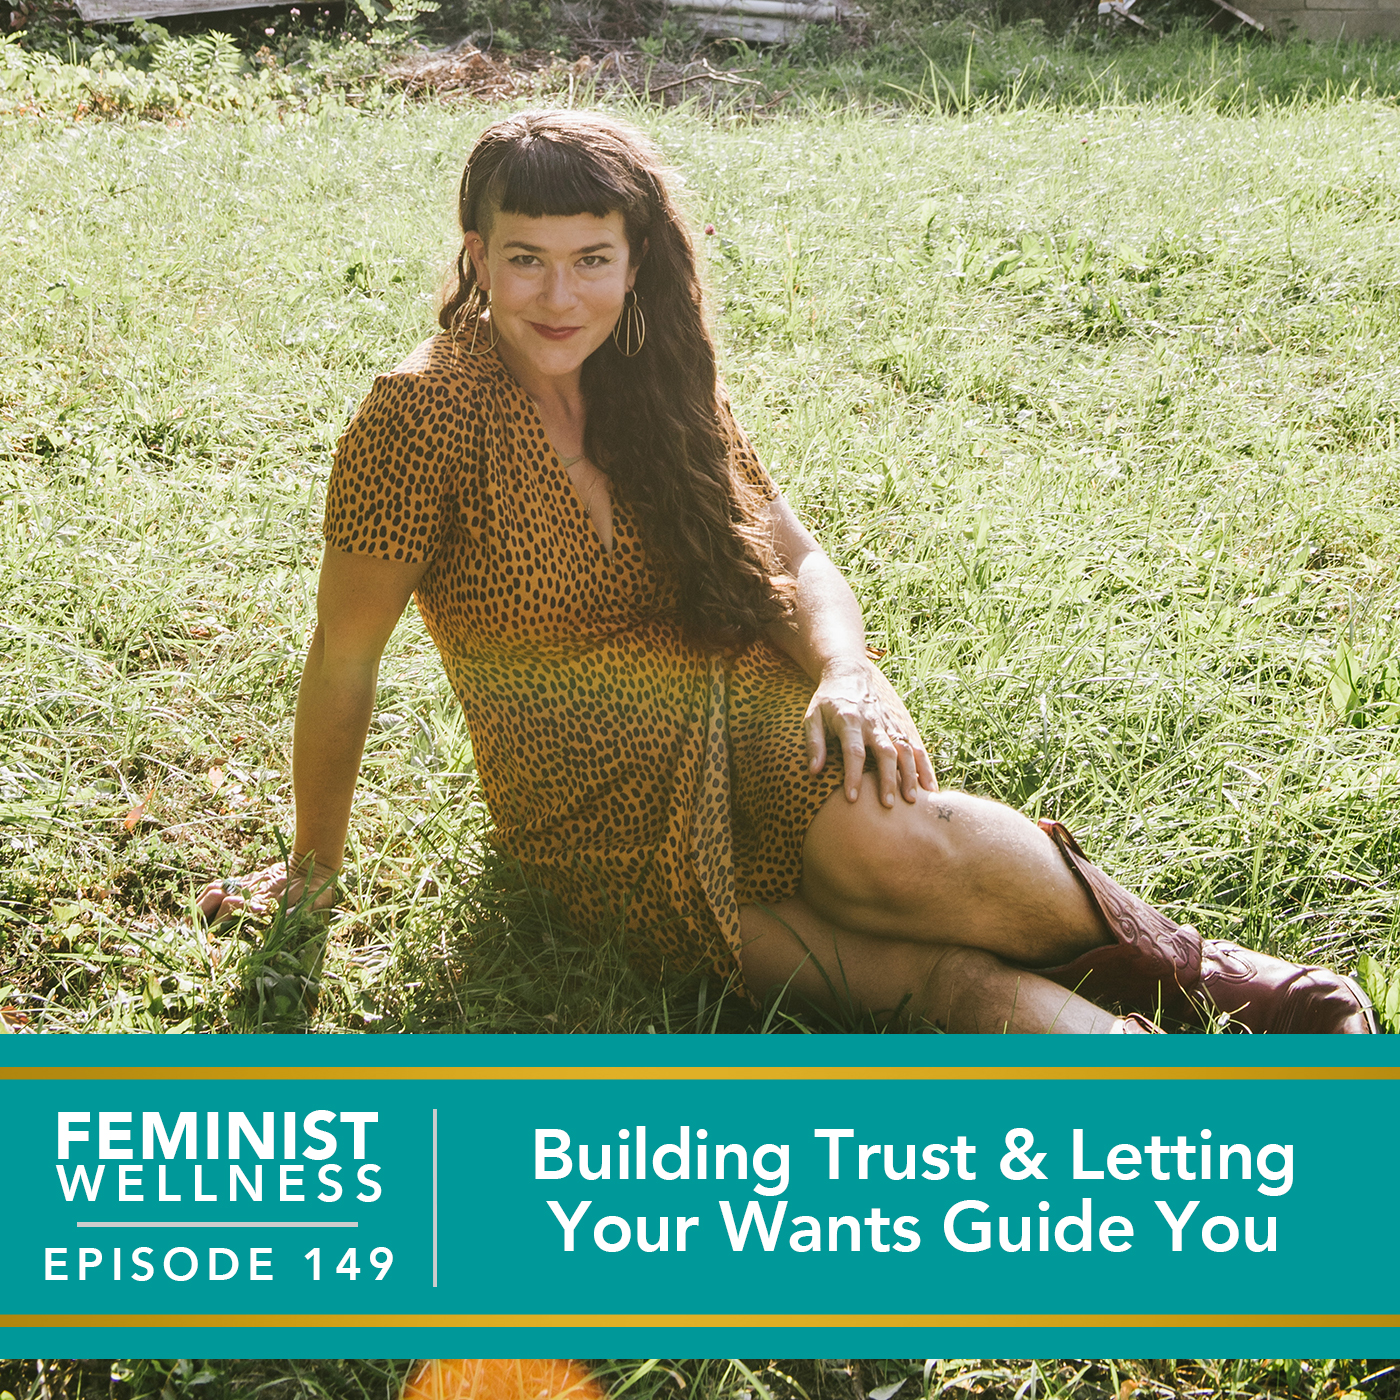 Feminist Wellness with Victoria Albina | Building Trust & Letting Your Wants Guide You